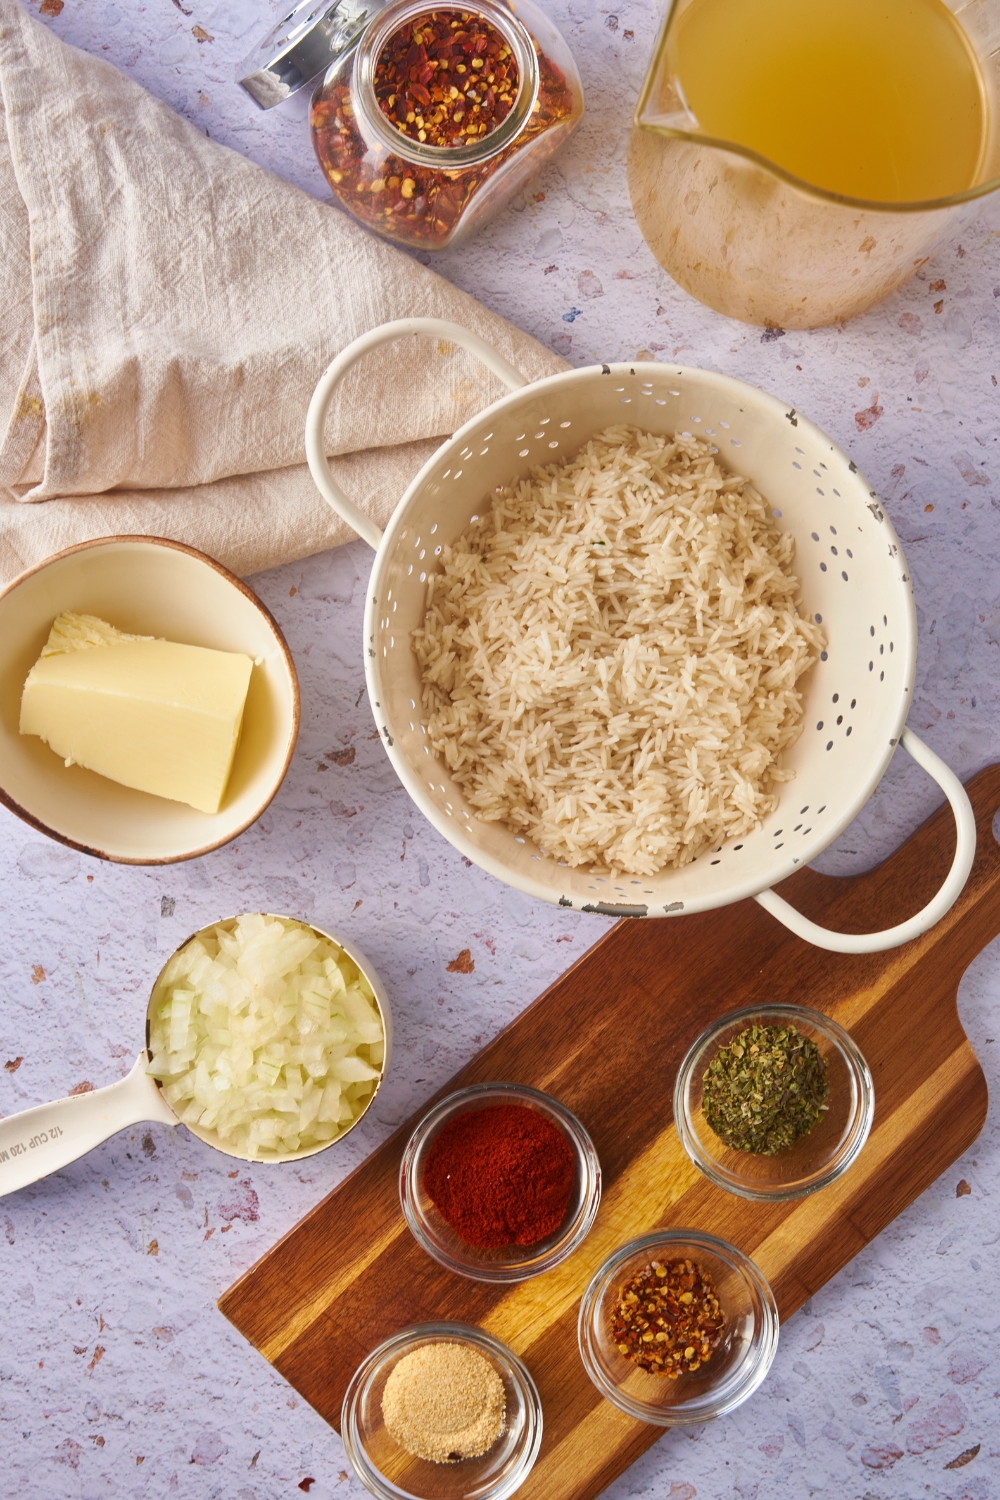 Overhead view of an assortment of ingredients including uncooked long grain rice in a colander and bowls of butter, diced onion, spices, and a pitcher of chicken stock.